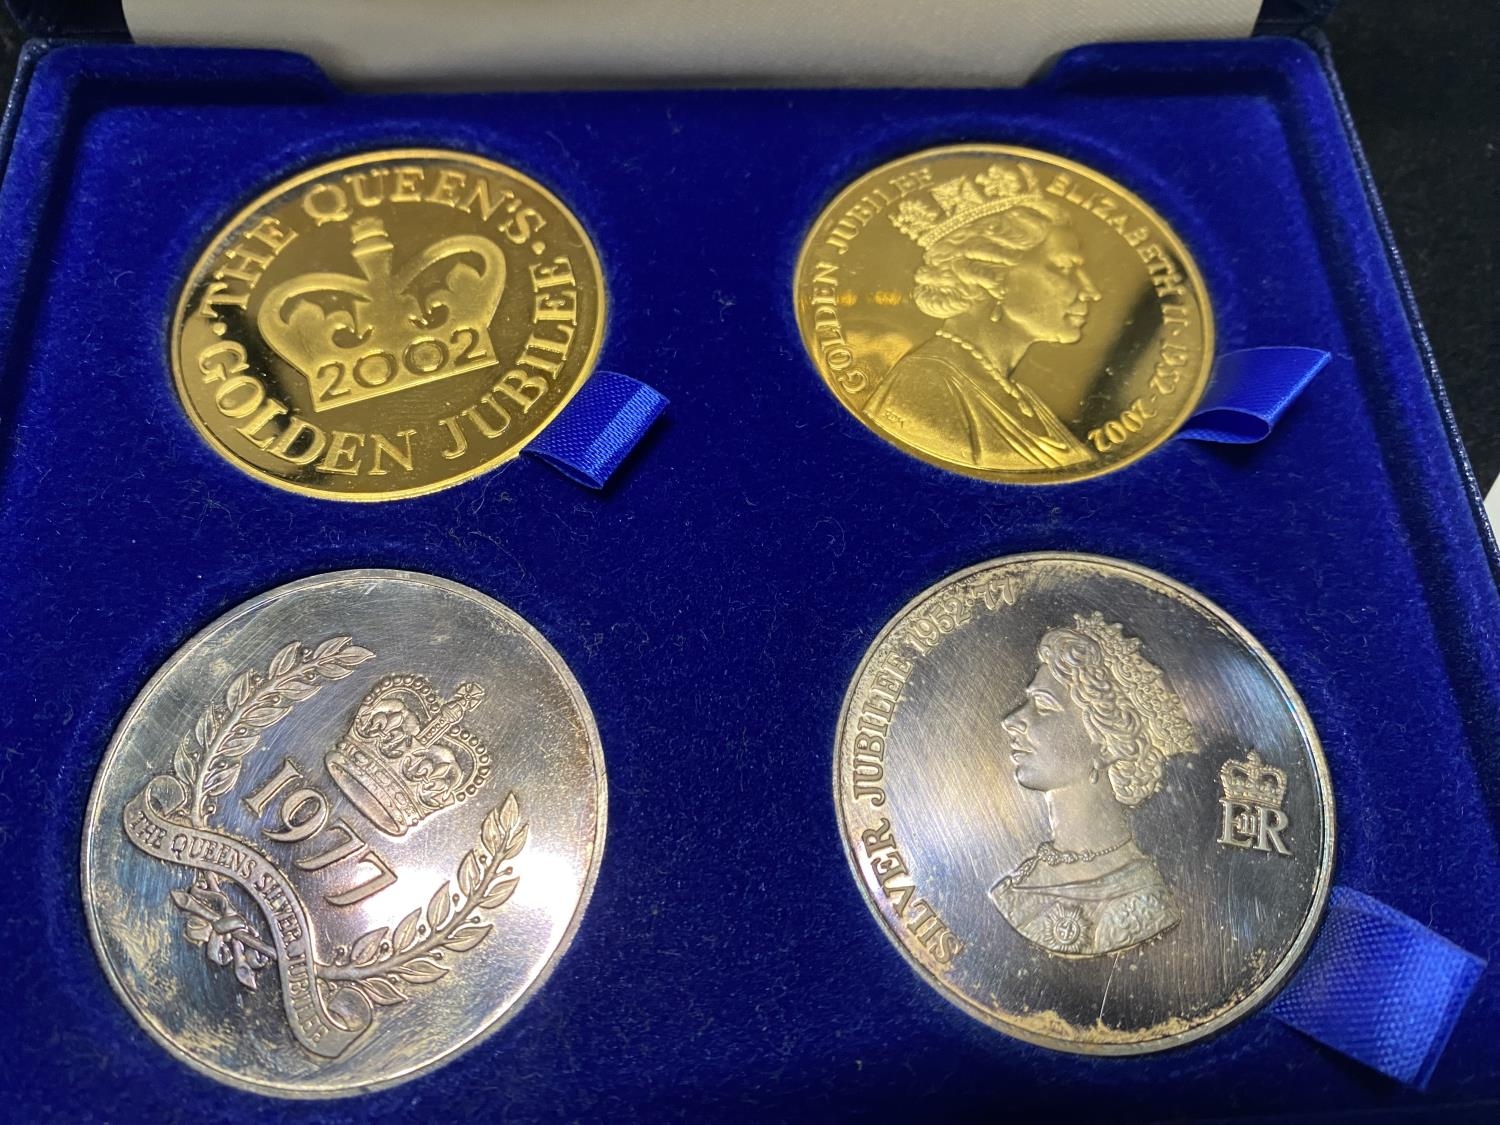 A Sterling silver plated & gold plated four coin set & a 1983 UK UNC coin set. - Image 2 of 3